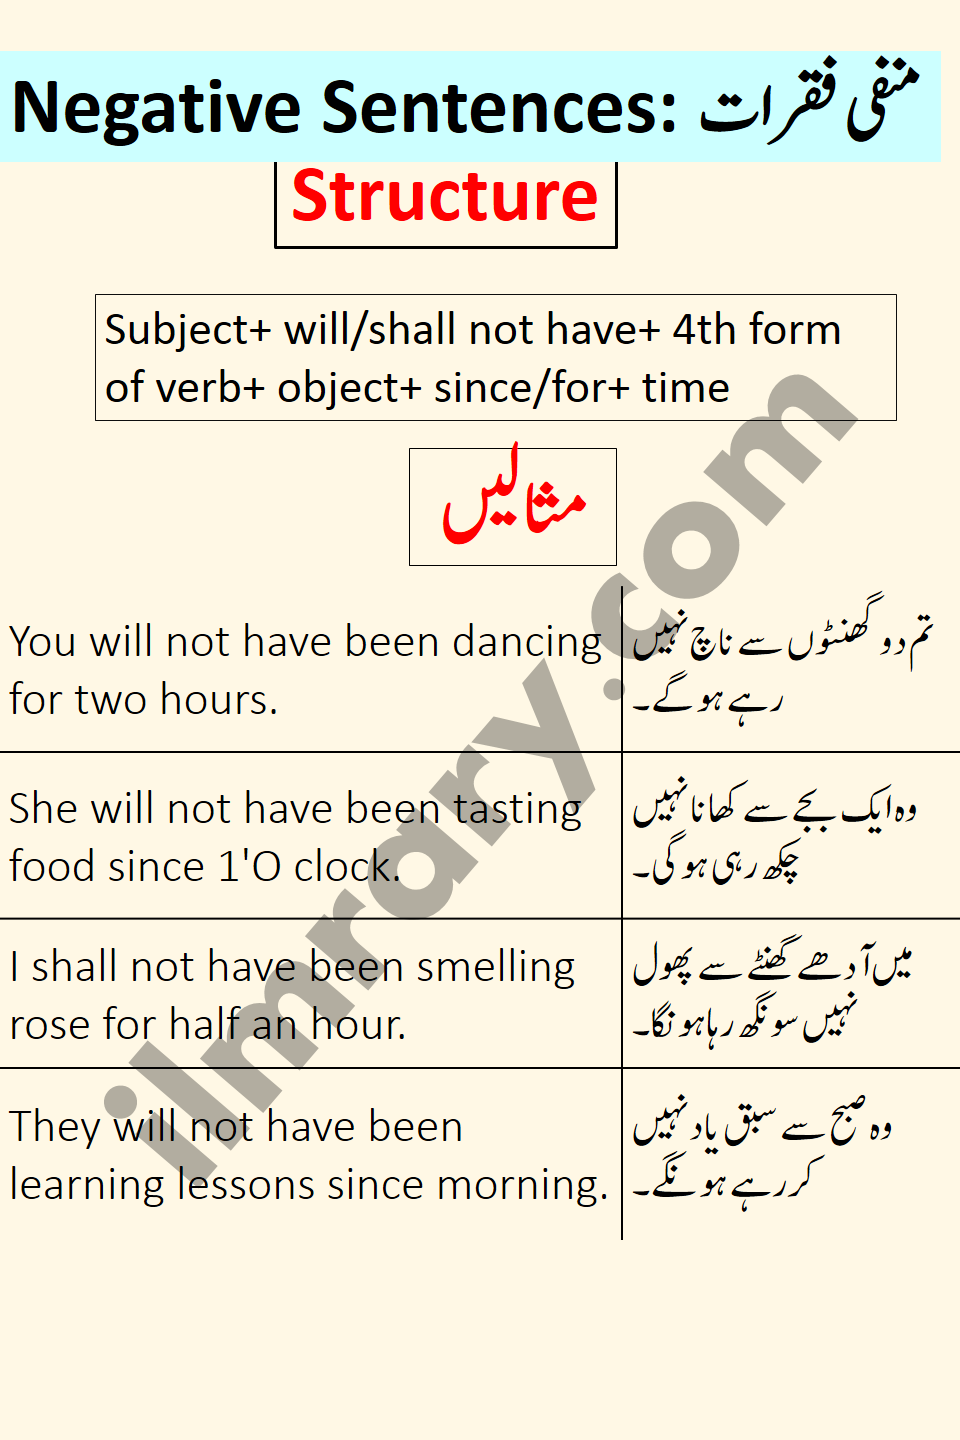 Negative Examples for Future Perfect Continuous Tense in Urdu